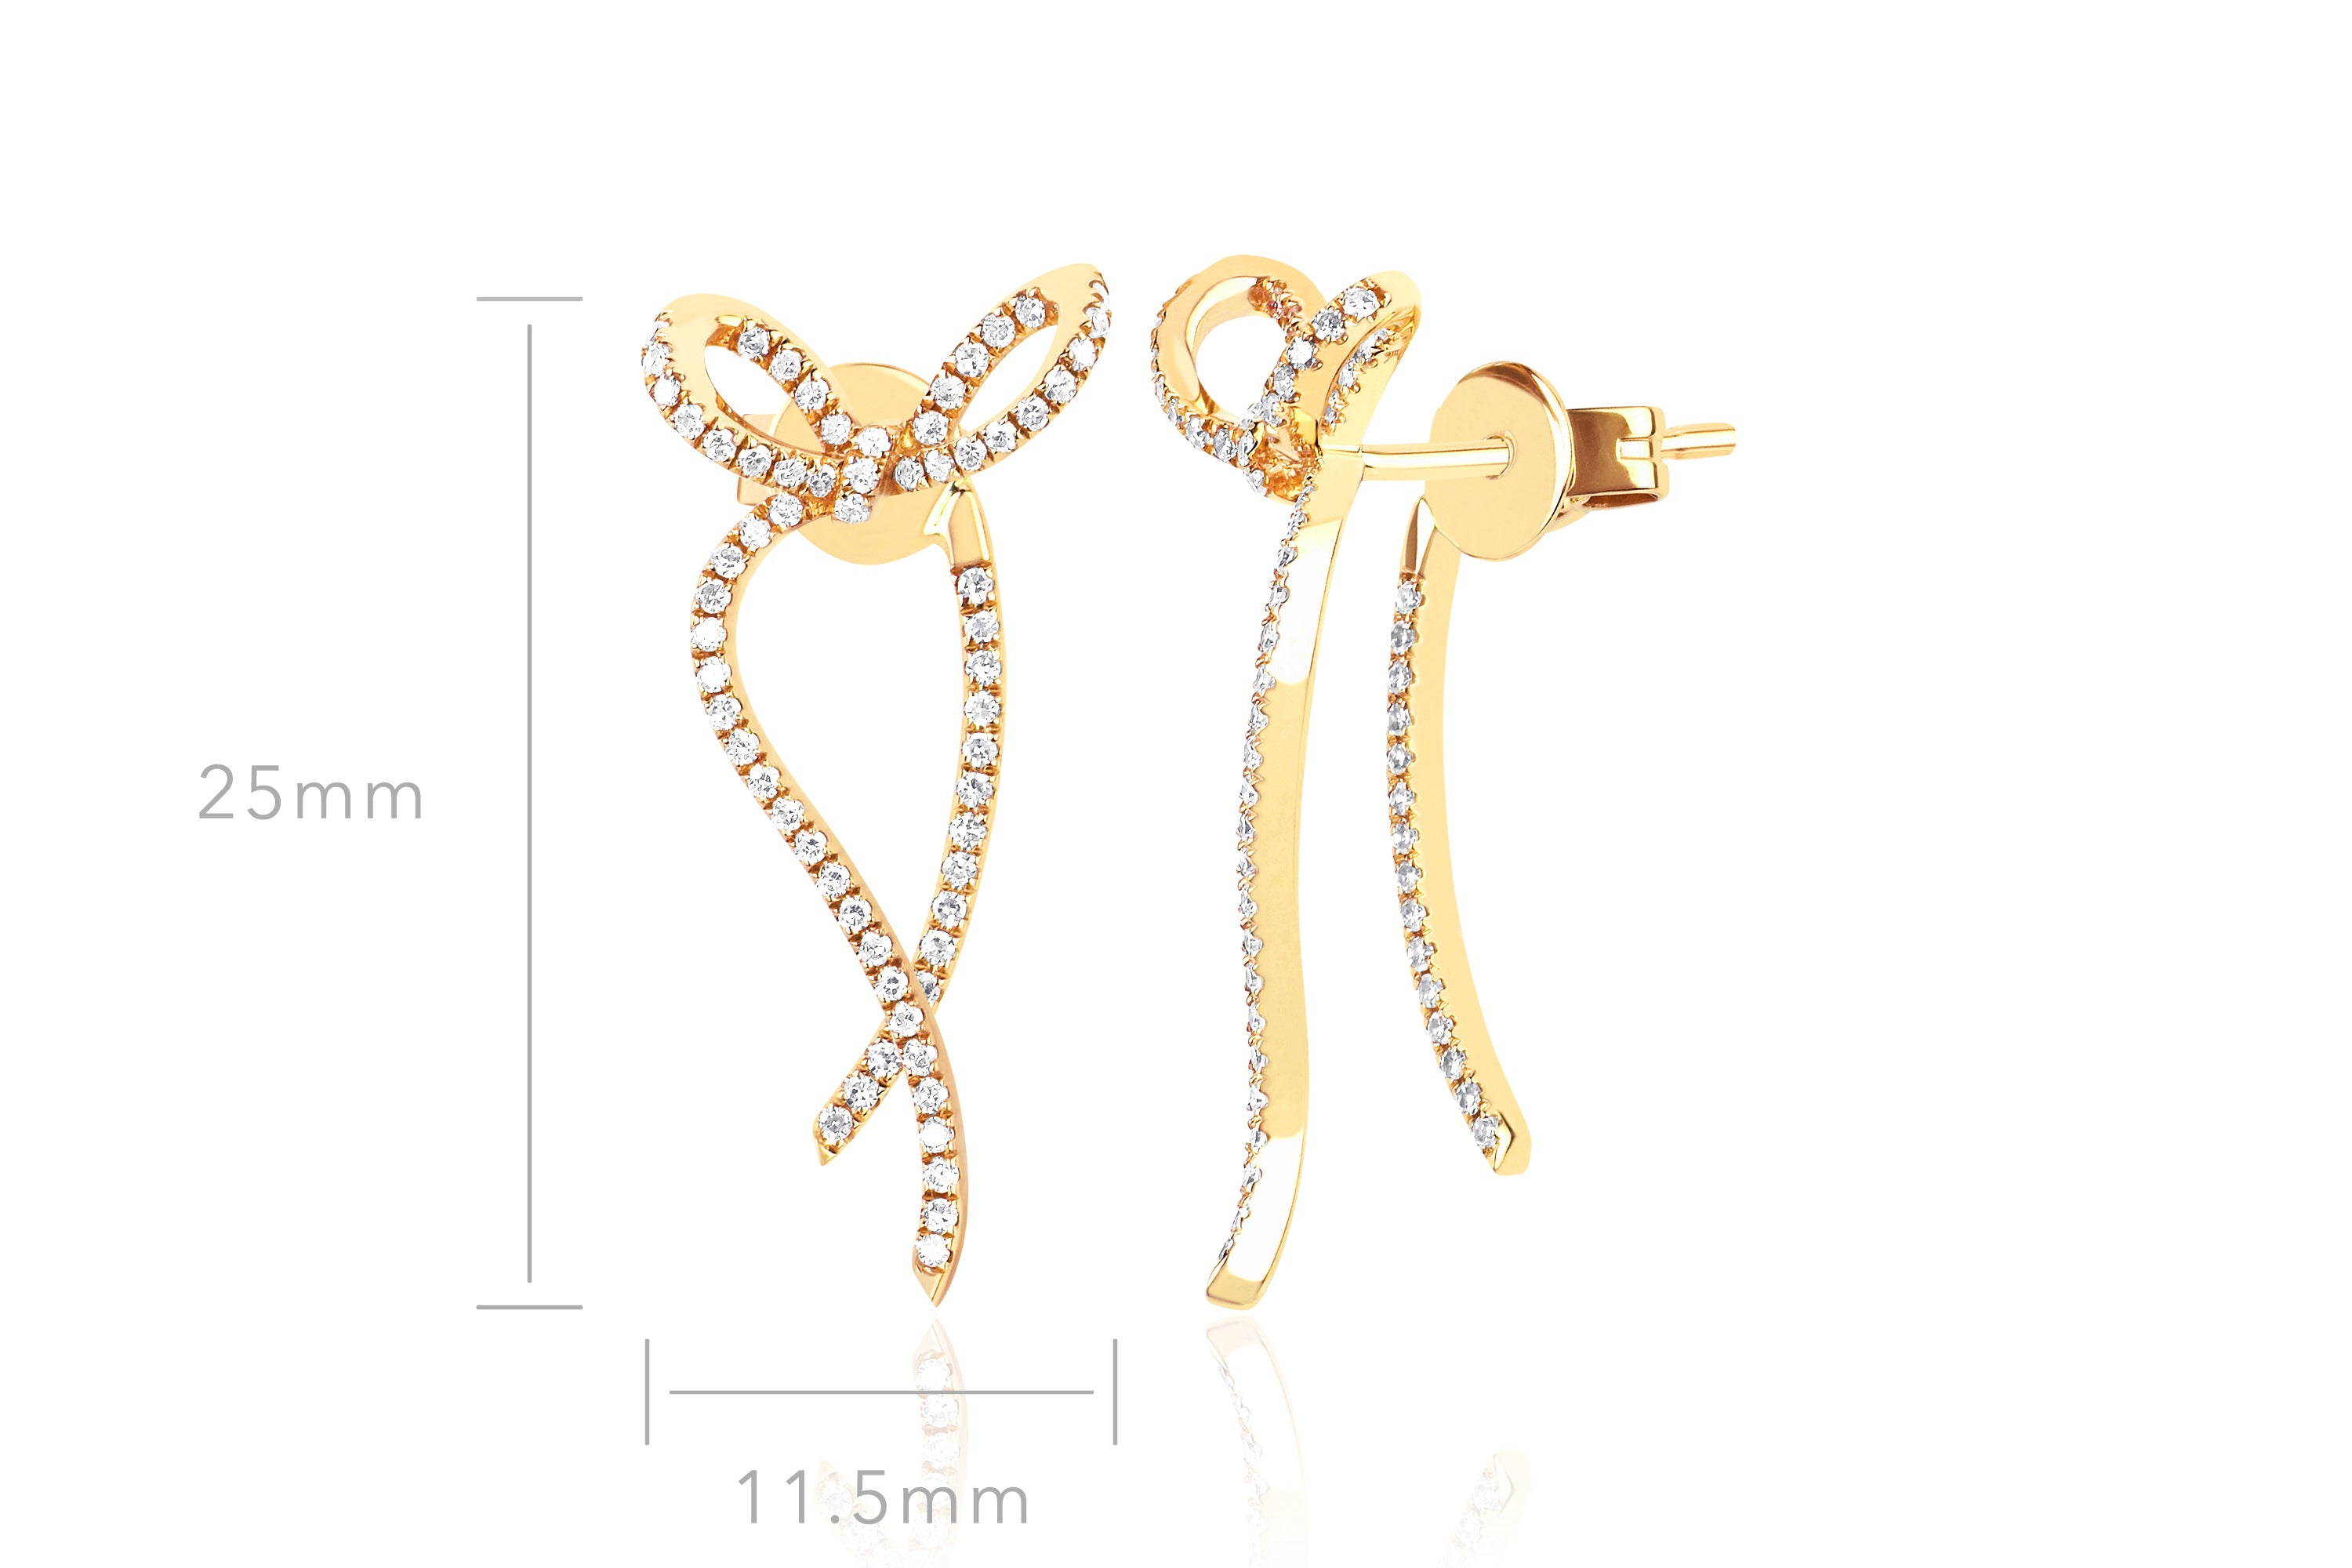 Diamond Bow Earring in 14k yellow gold with size display of 25mm height and 11.5mm width